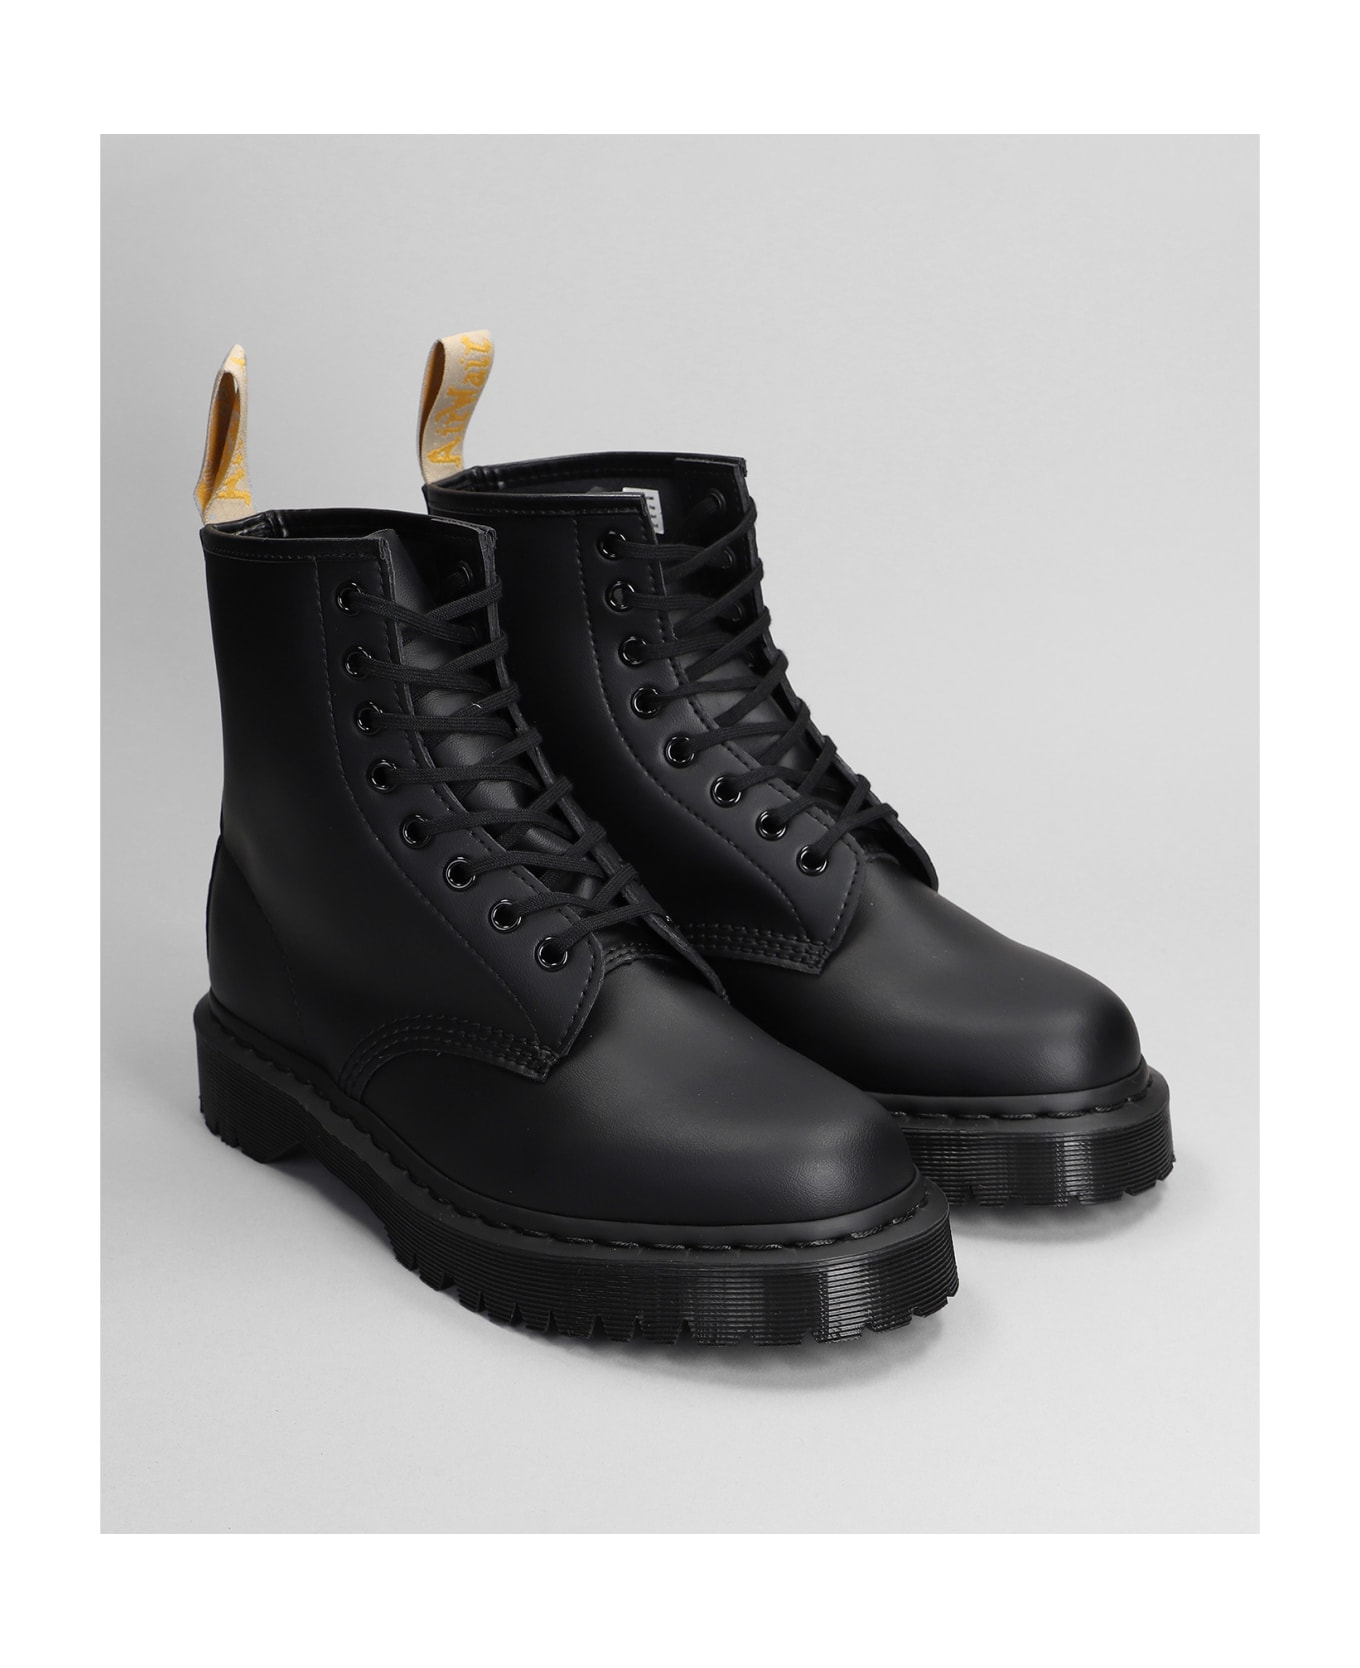 Dr. Martens 1460 Mono Combat Boots In Black Leather - black